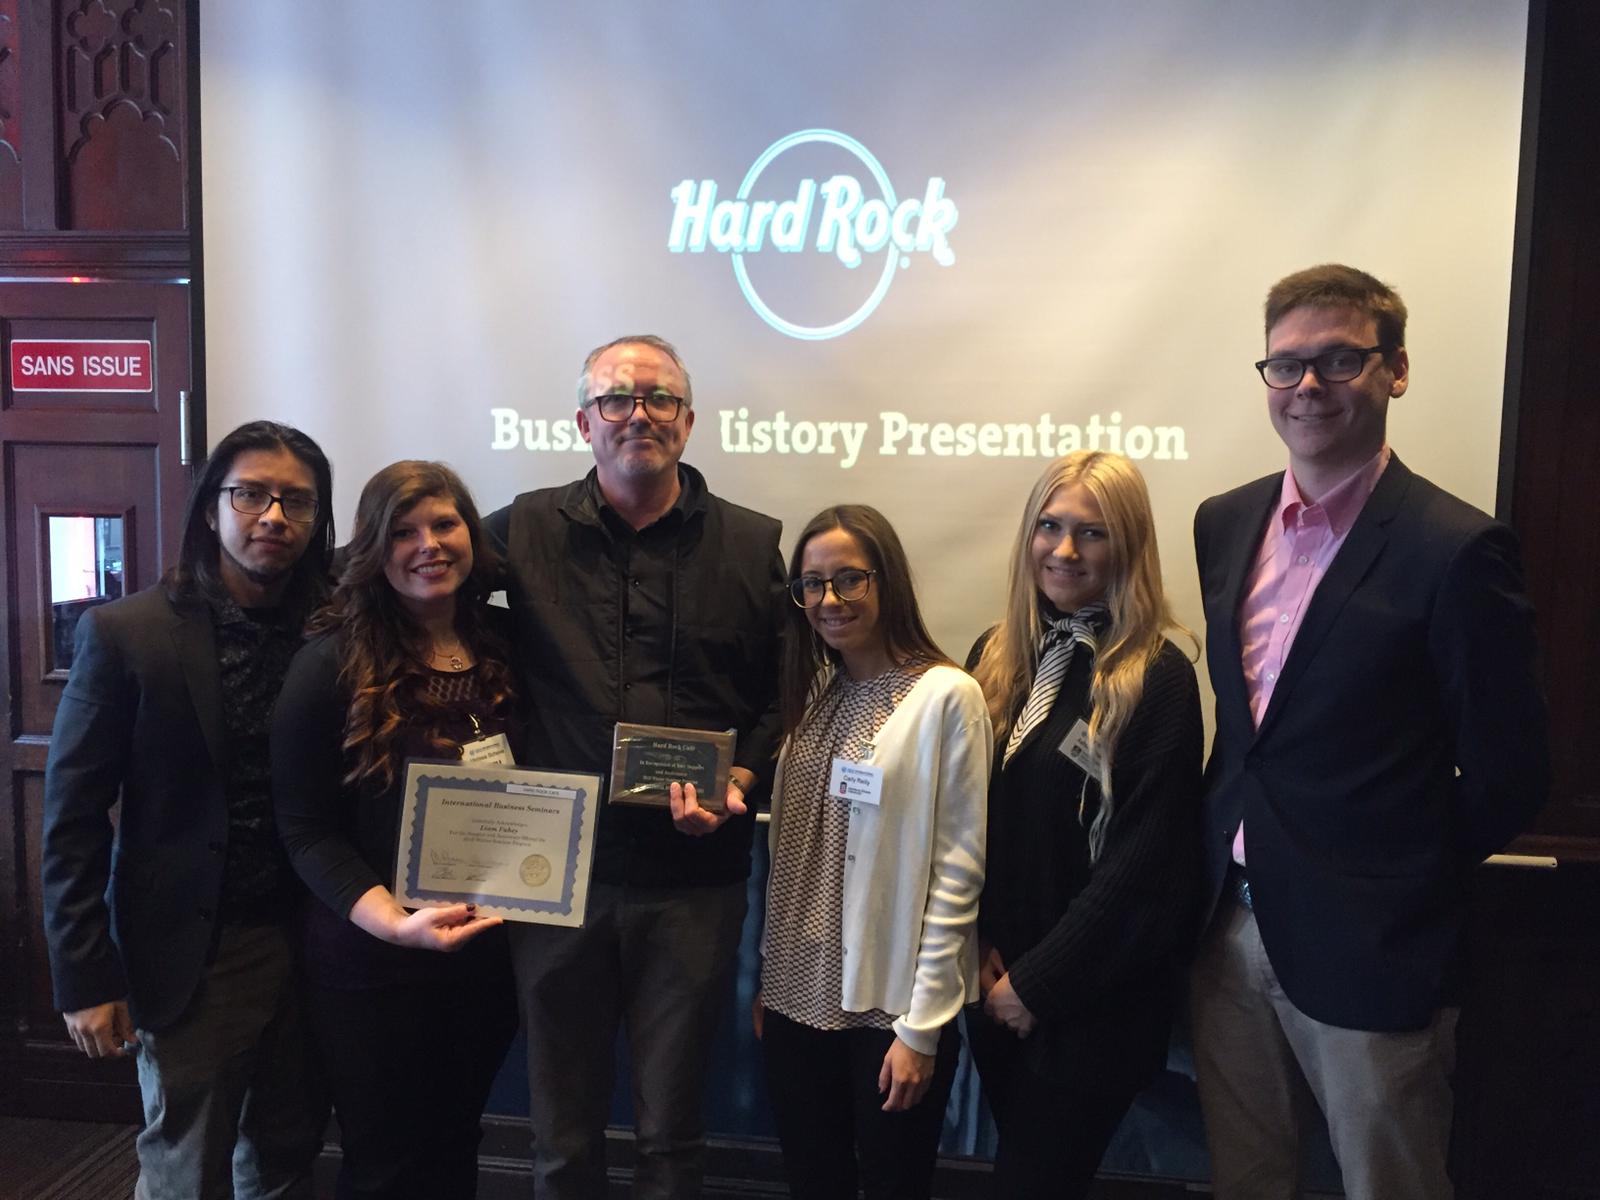 Ashley with business professionals at a company visit with Hard Rock Cafe